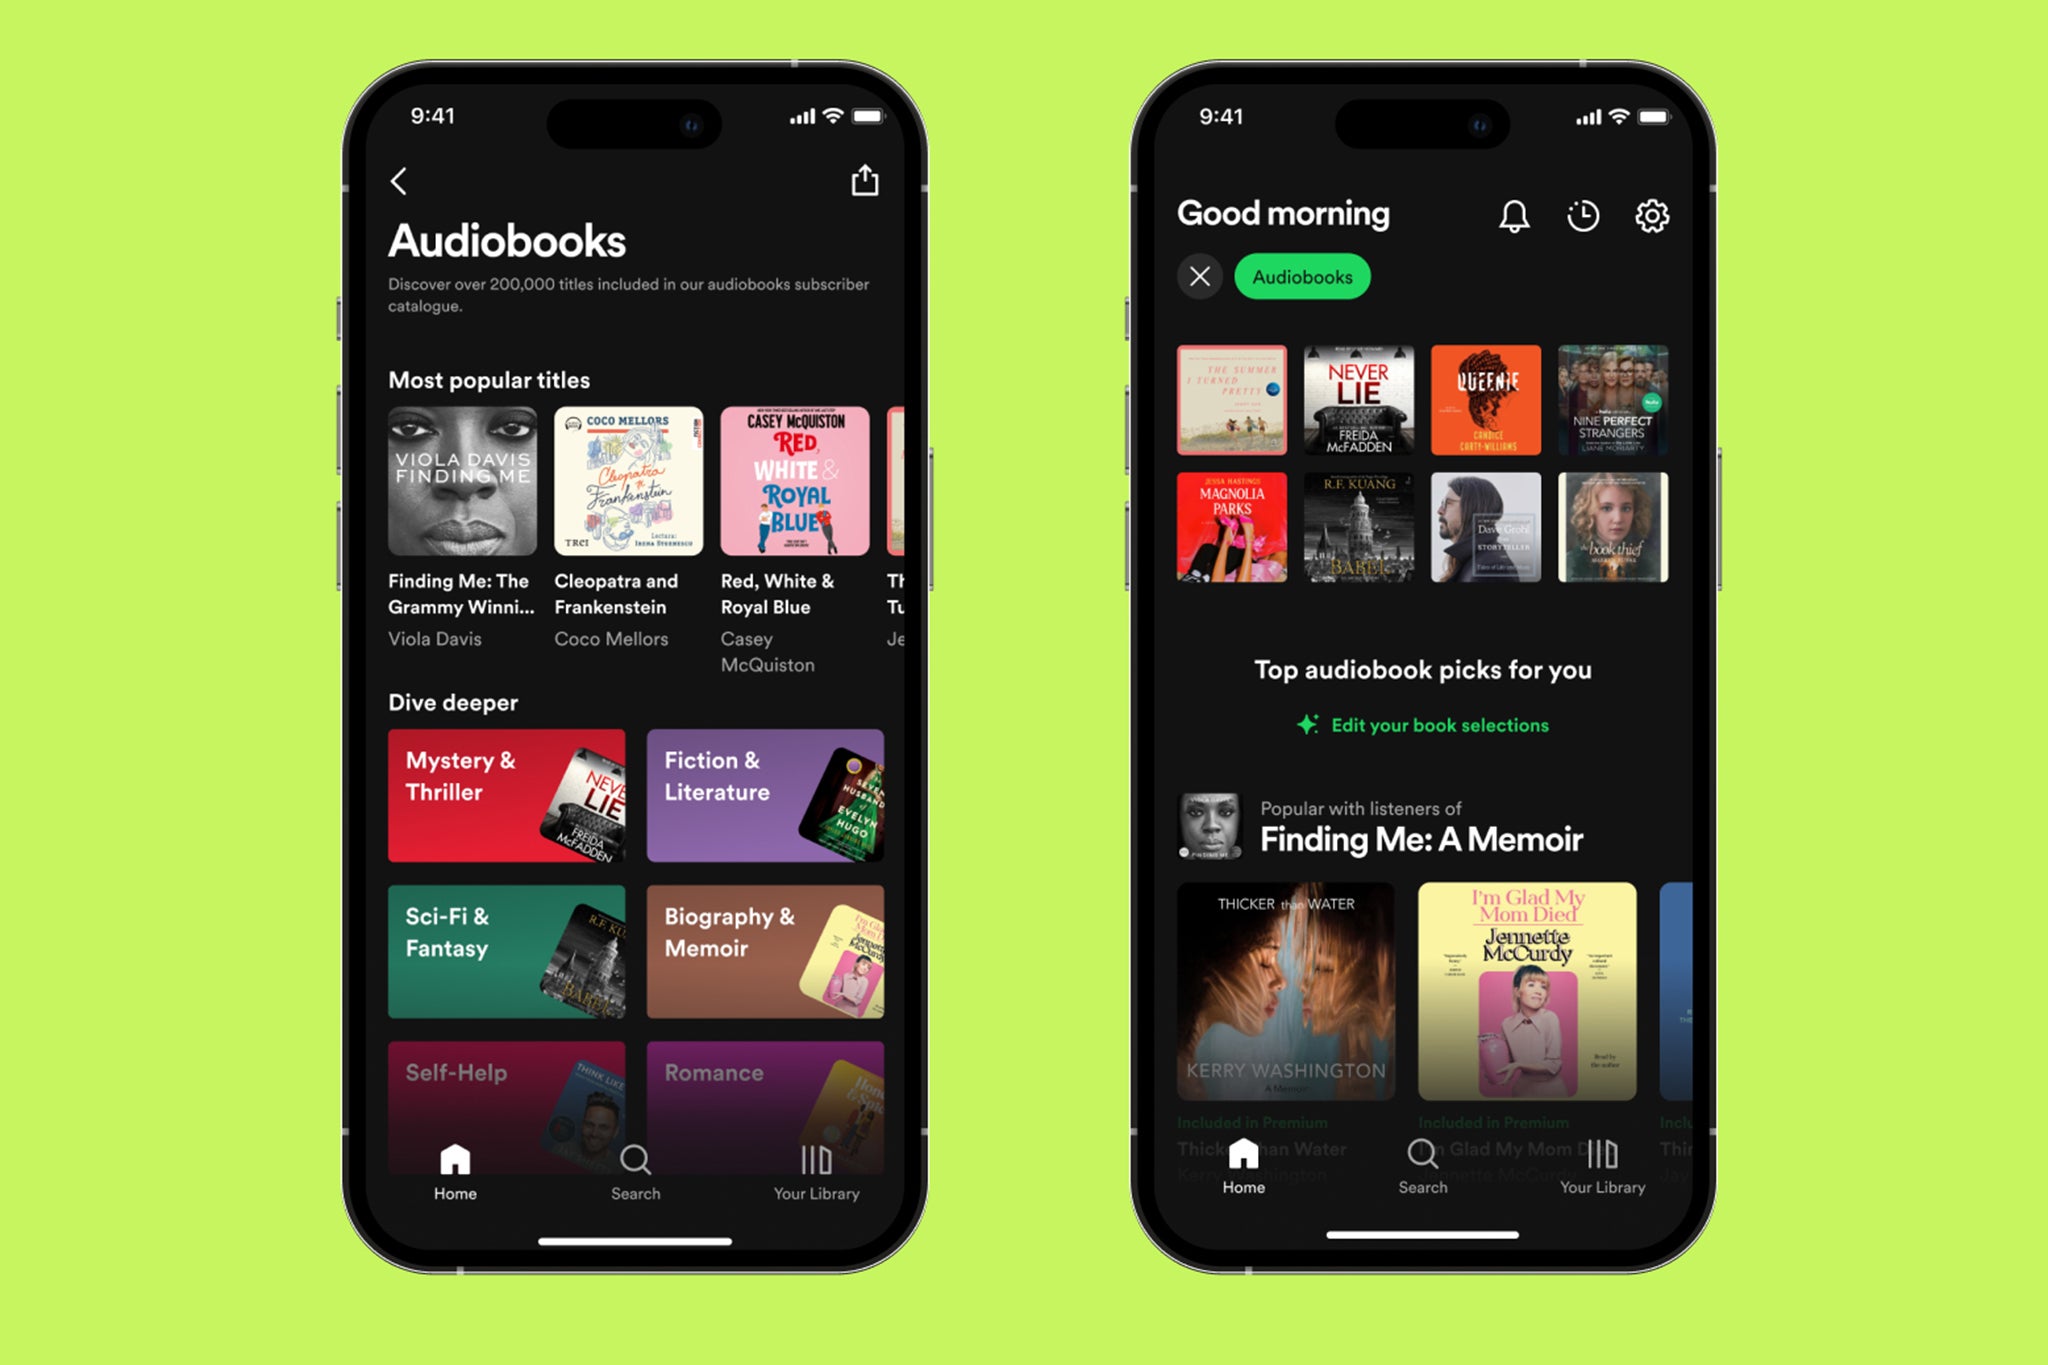 Although Spotify is positioned to give listeners even more convenience, access, and options, streaming will be bad for audiobook fans in the long run